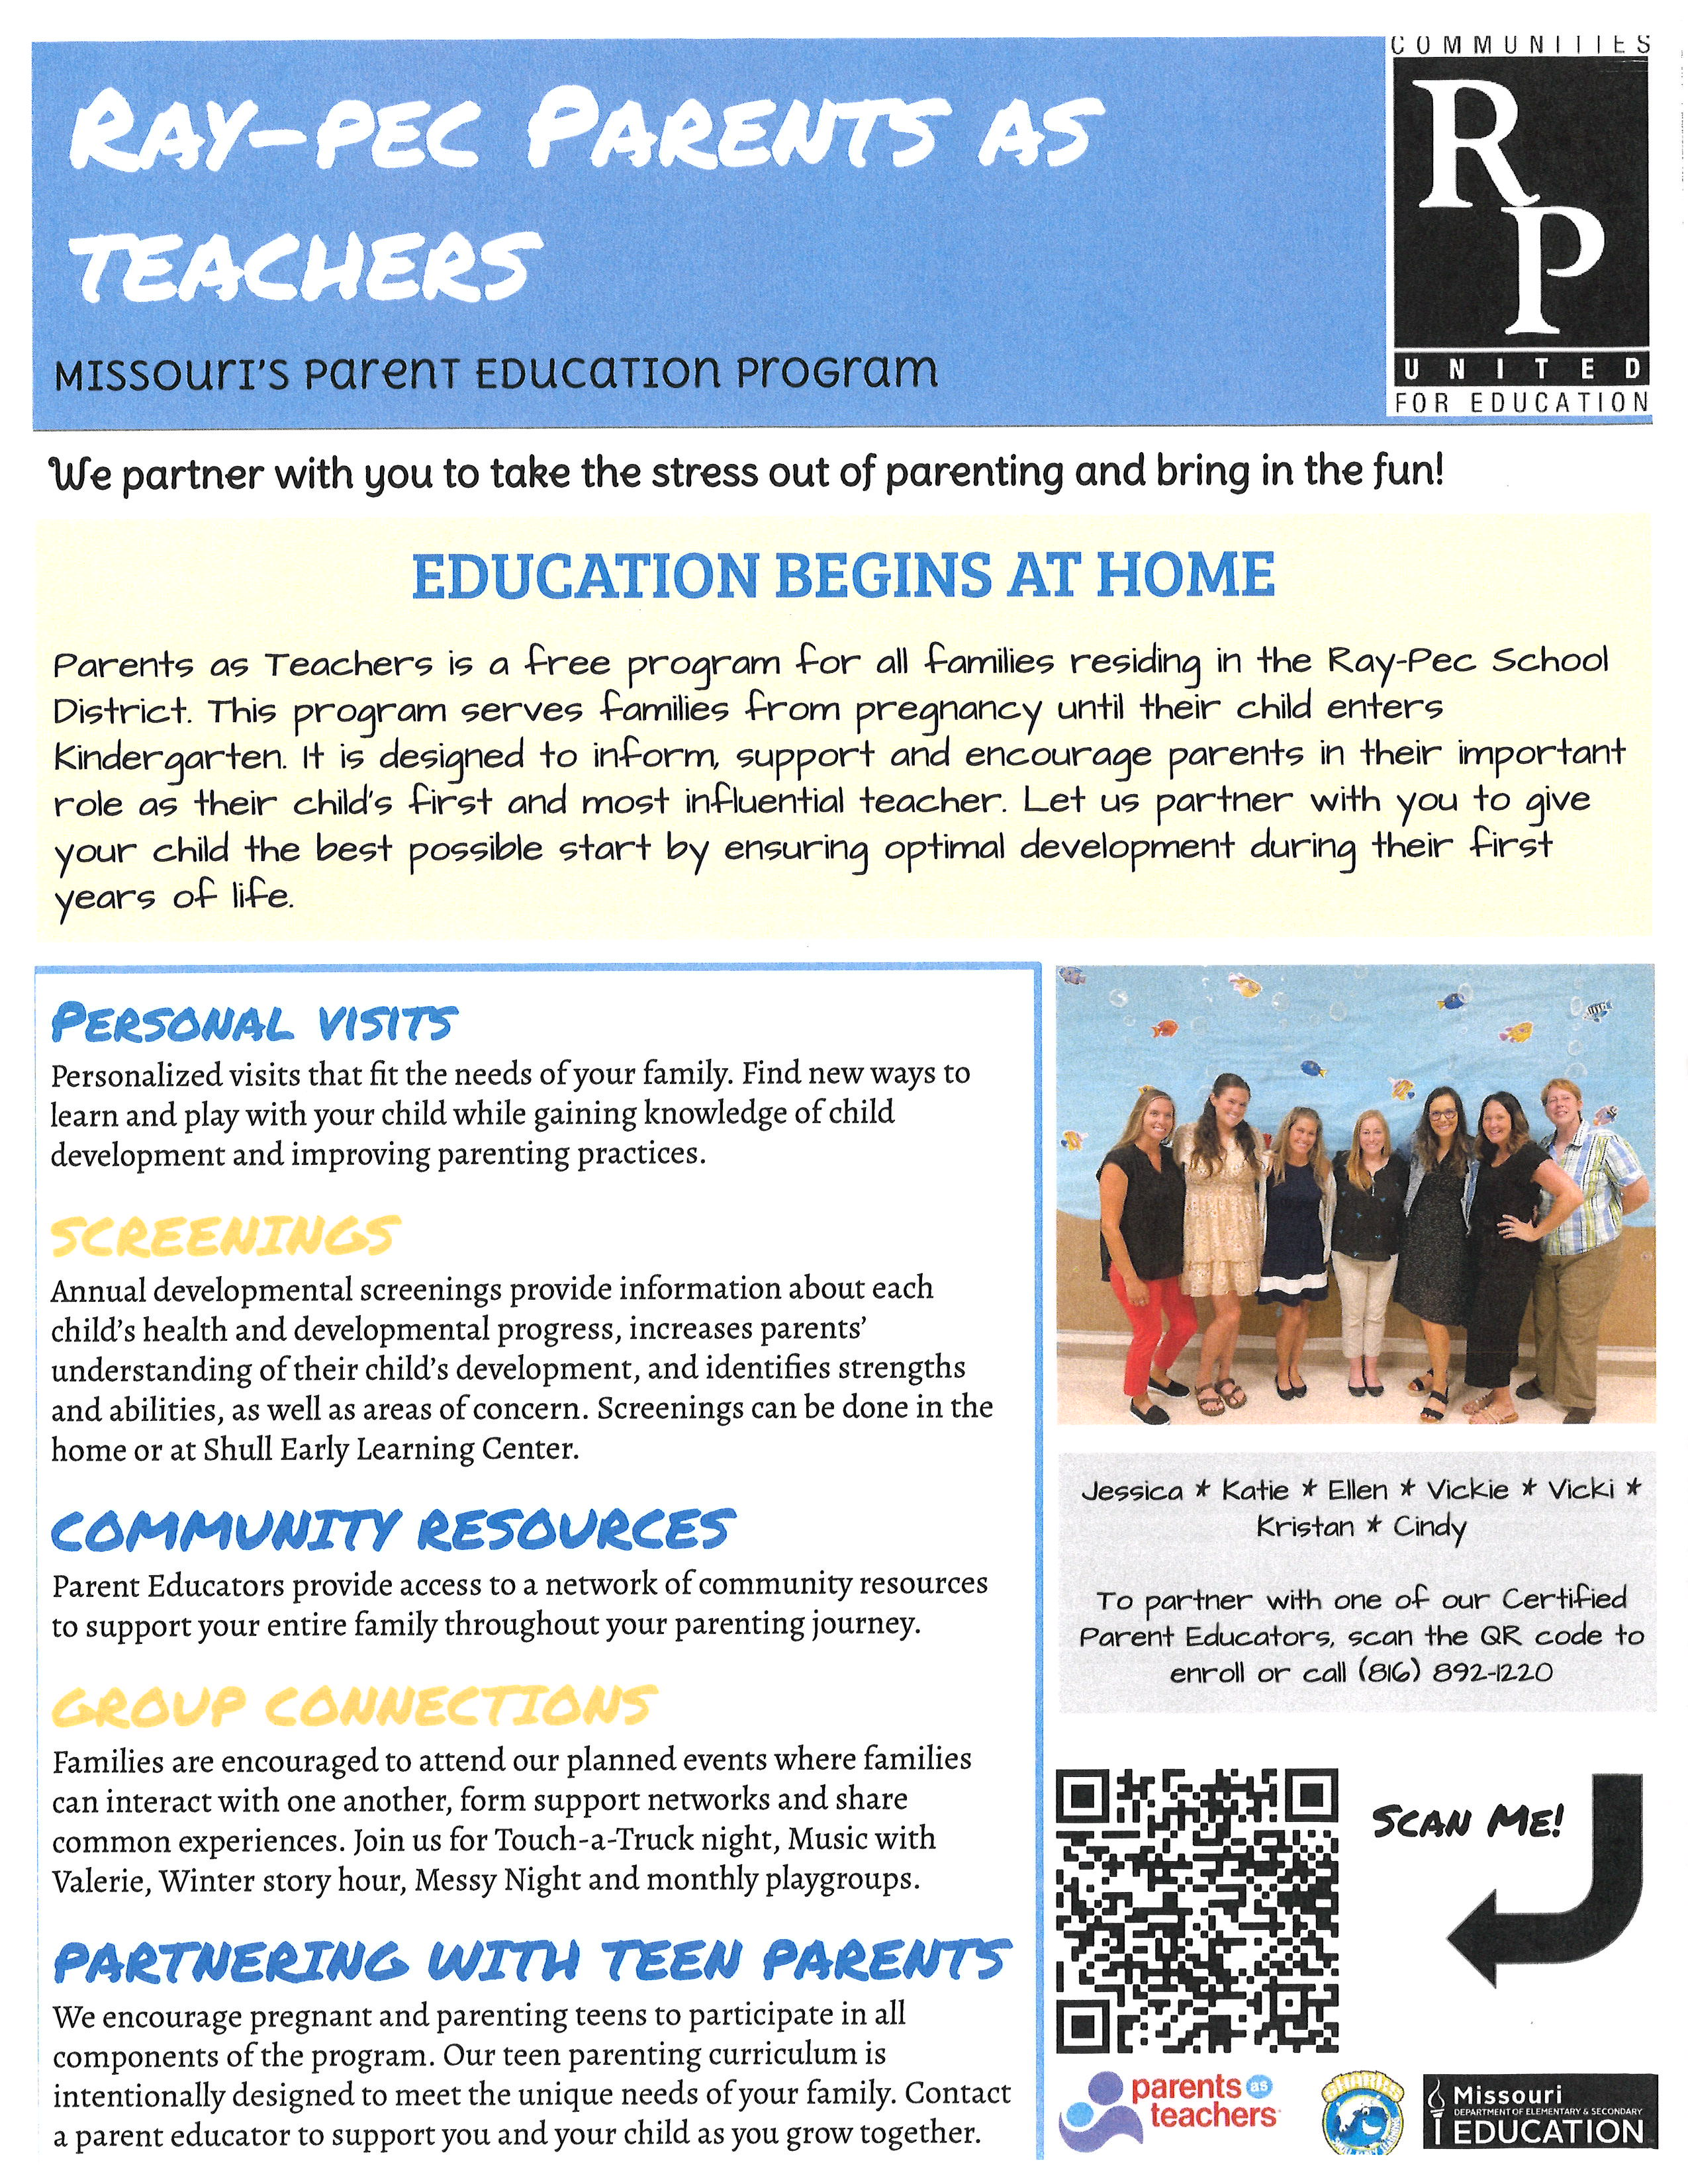 Parents as Teachers Flyer- call 816.892.1220 for information